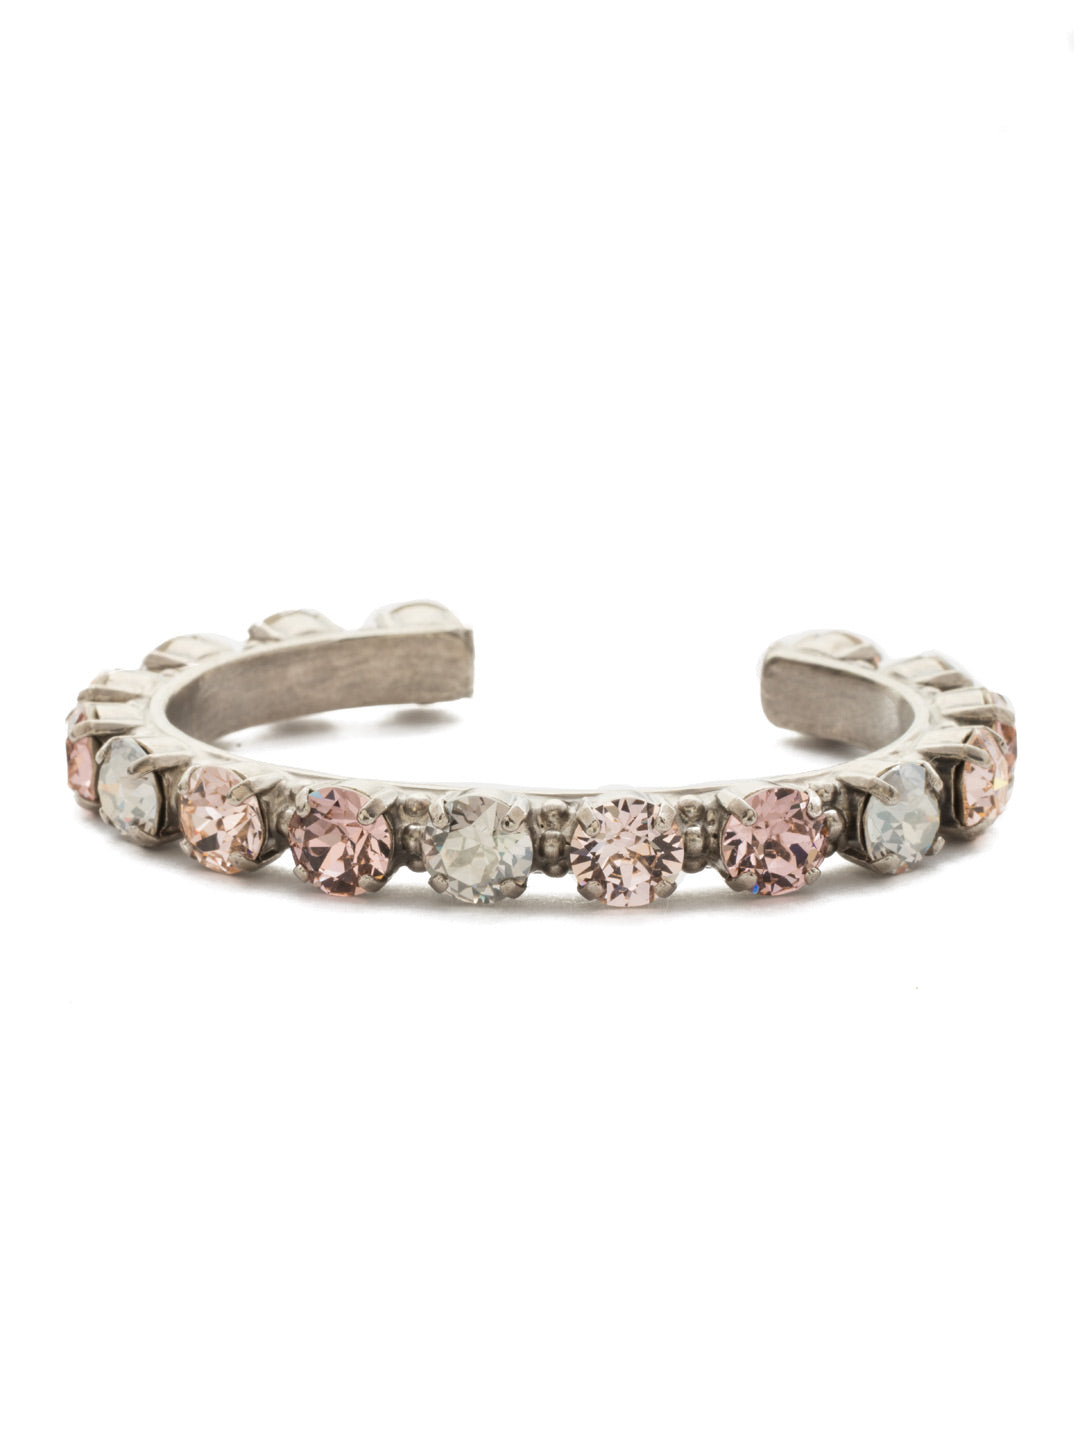 Riveting Romance  Cuff Bracelet - BCL23ASSRO - Truly antique-inspired, this piece can be mixed and matched in so many ways. Wear it with a vintage inspired outfit, or add a twist to a modern trend. This piece will work with you!